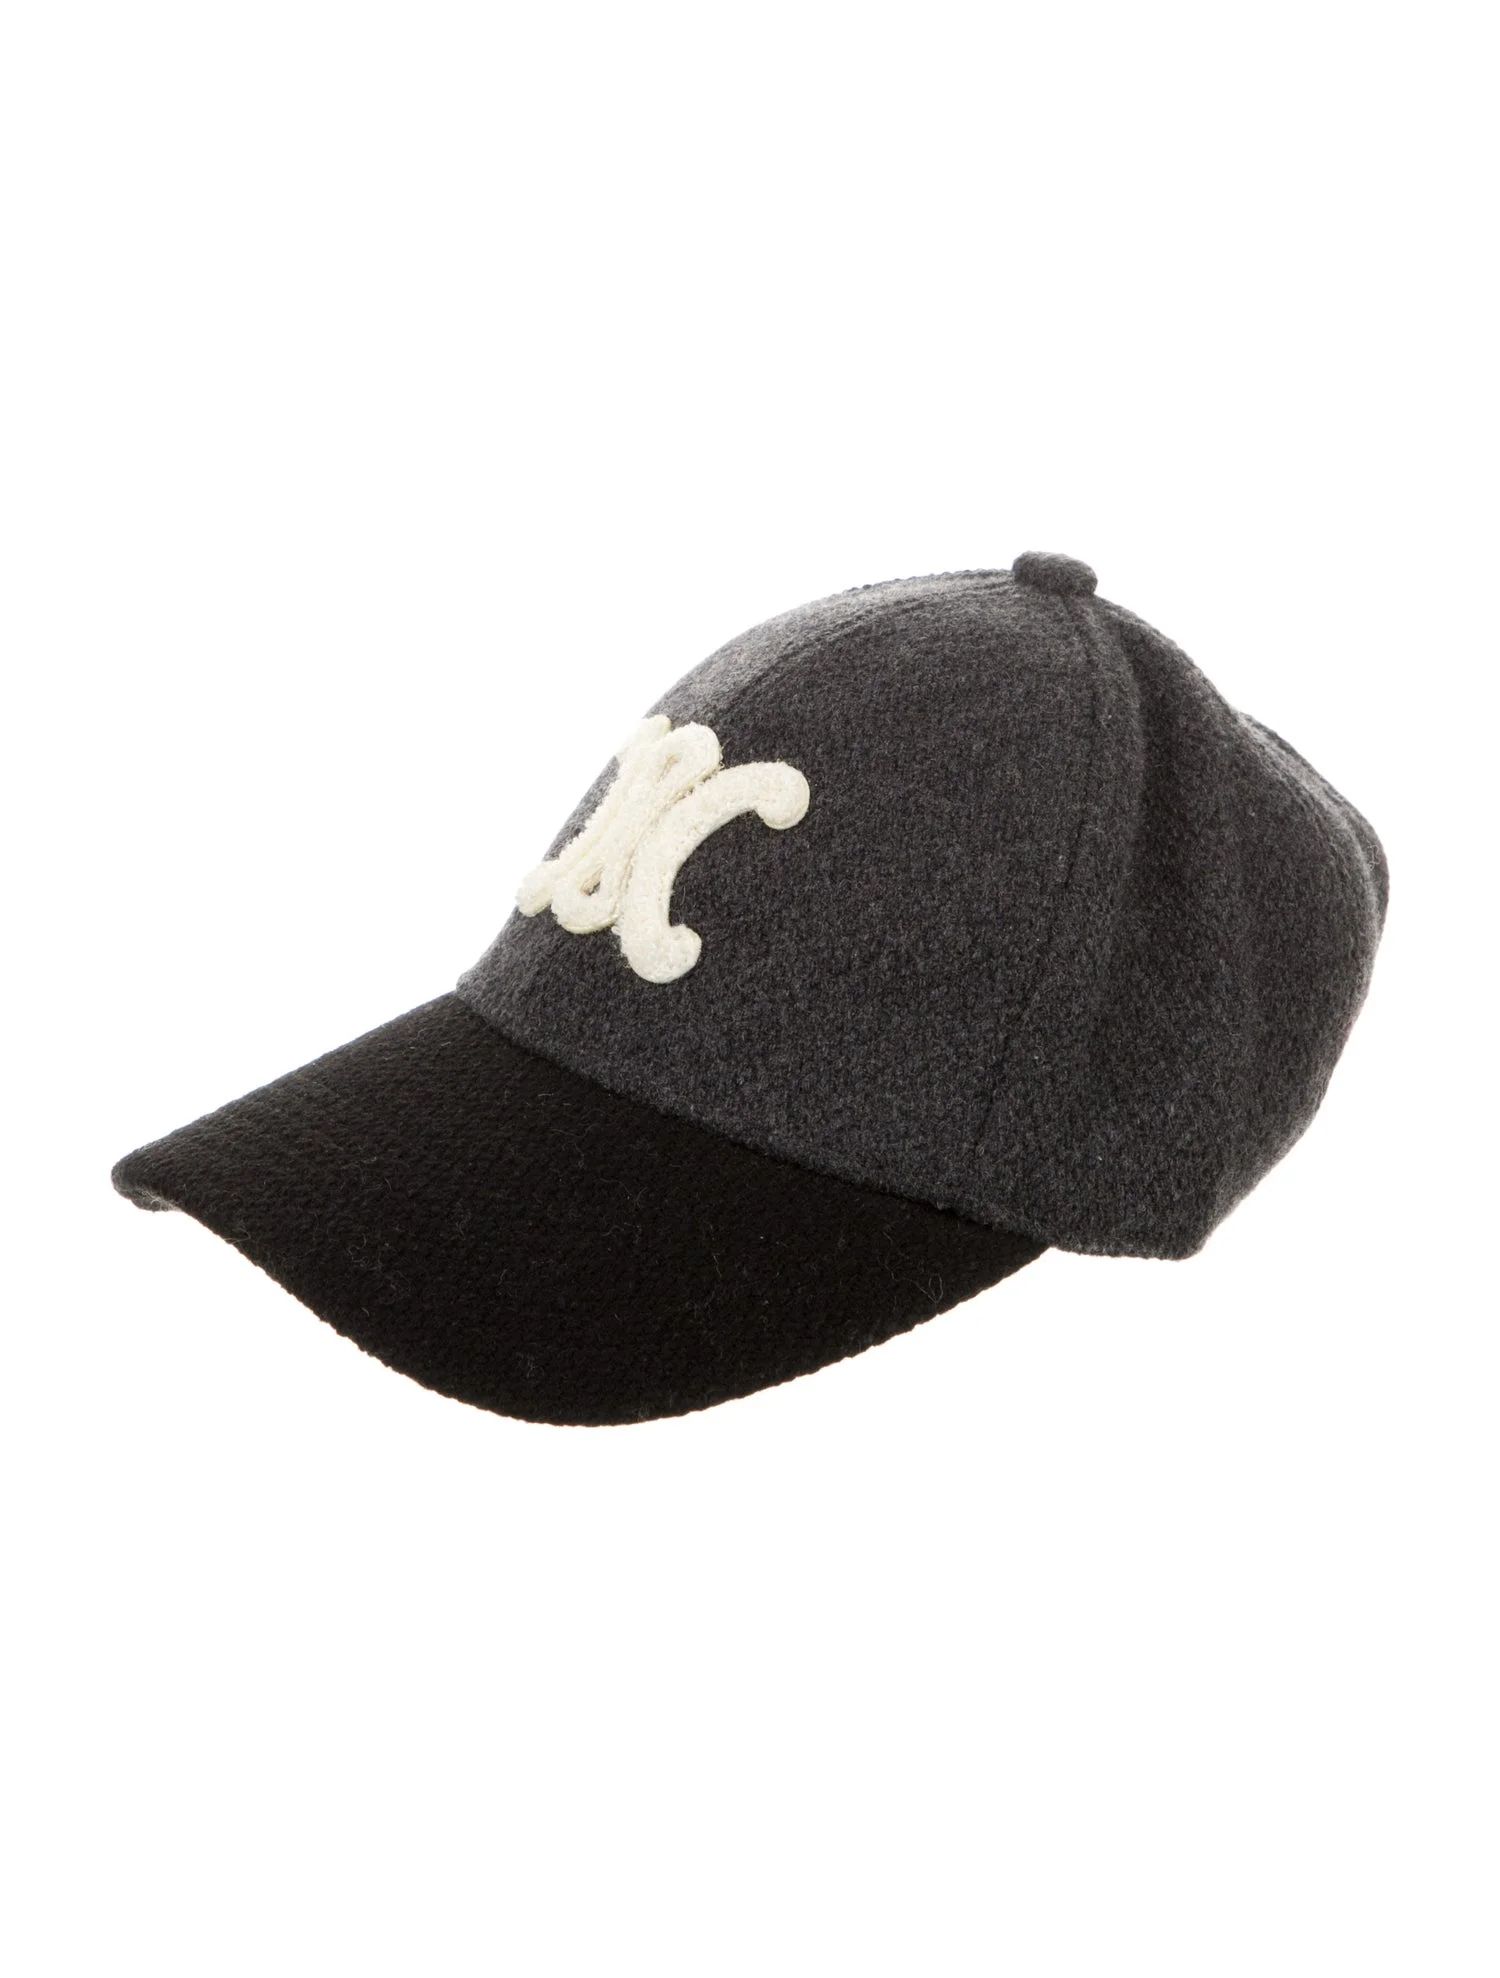 Embroidered Adjustable Baseball Cap | The RealReal